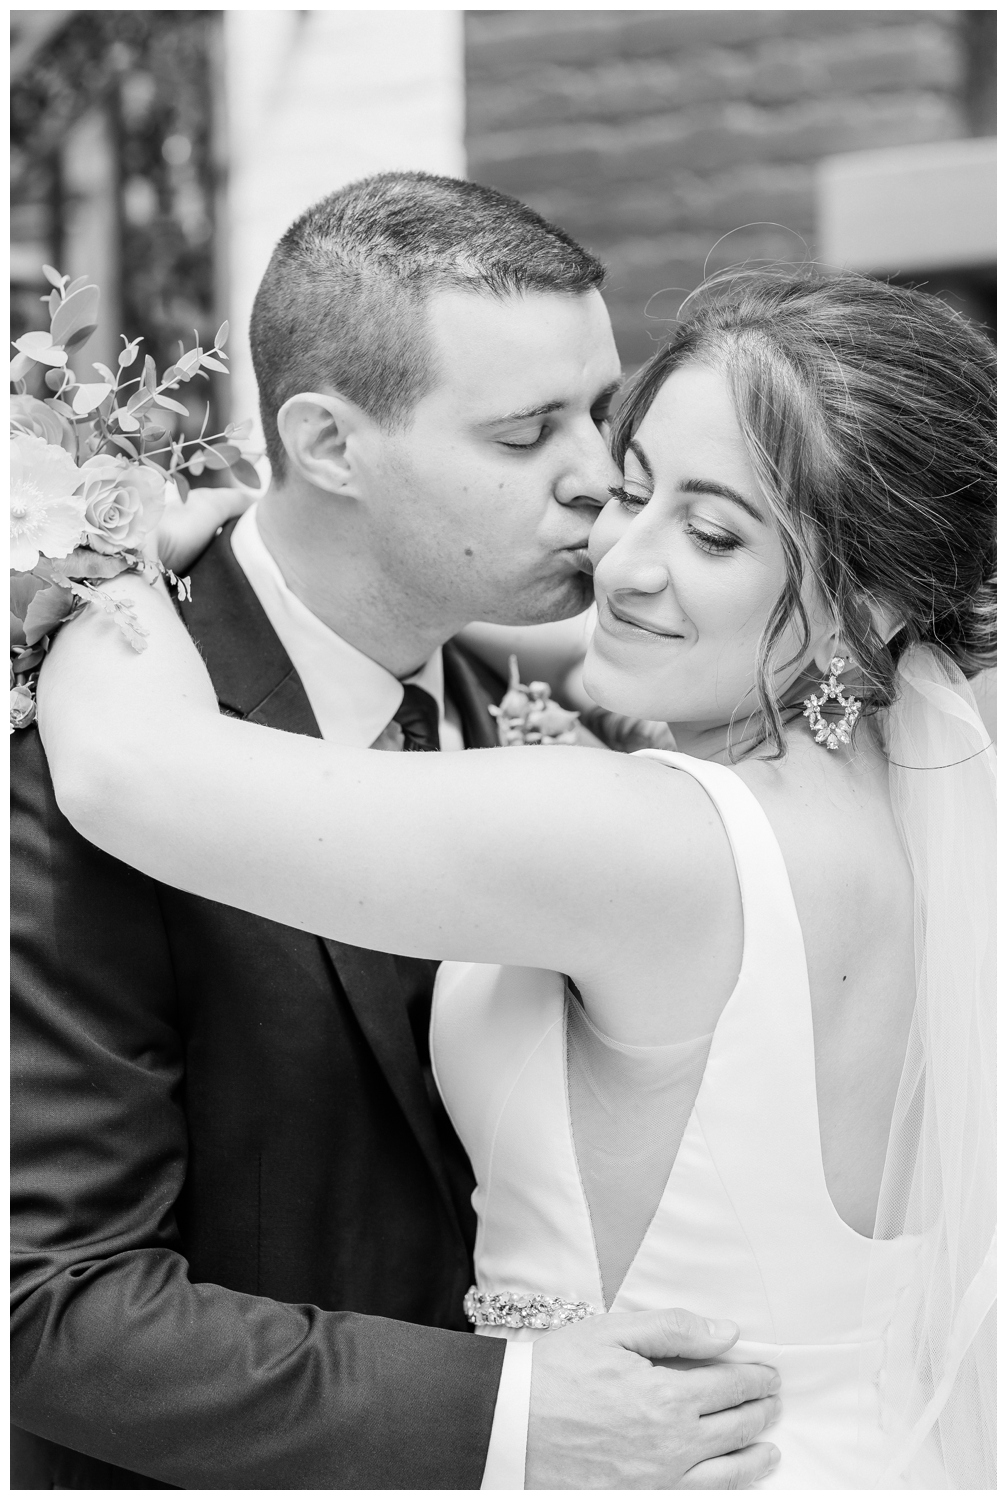 Black and white portrait of the Bride and Groom as he kisses her cheek.